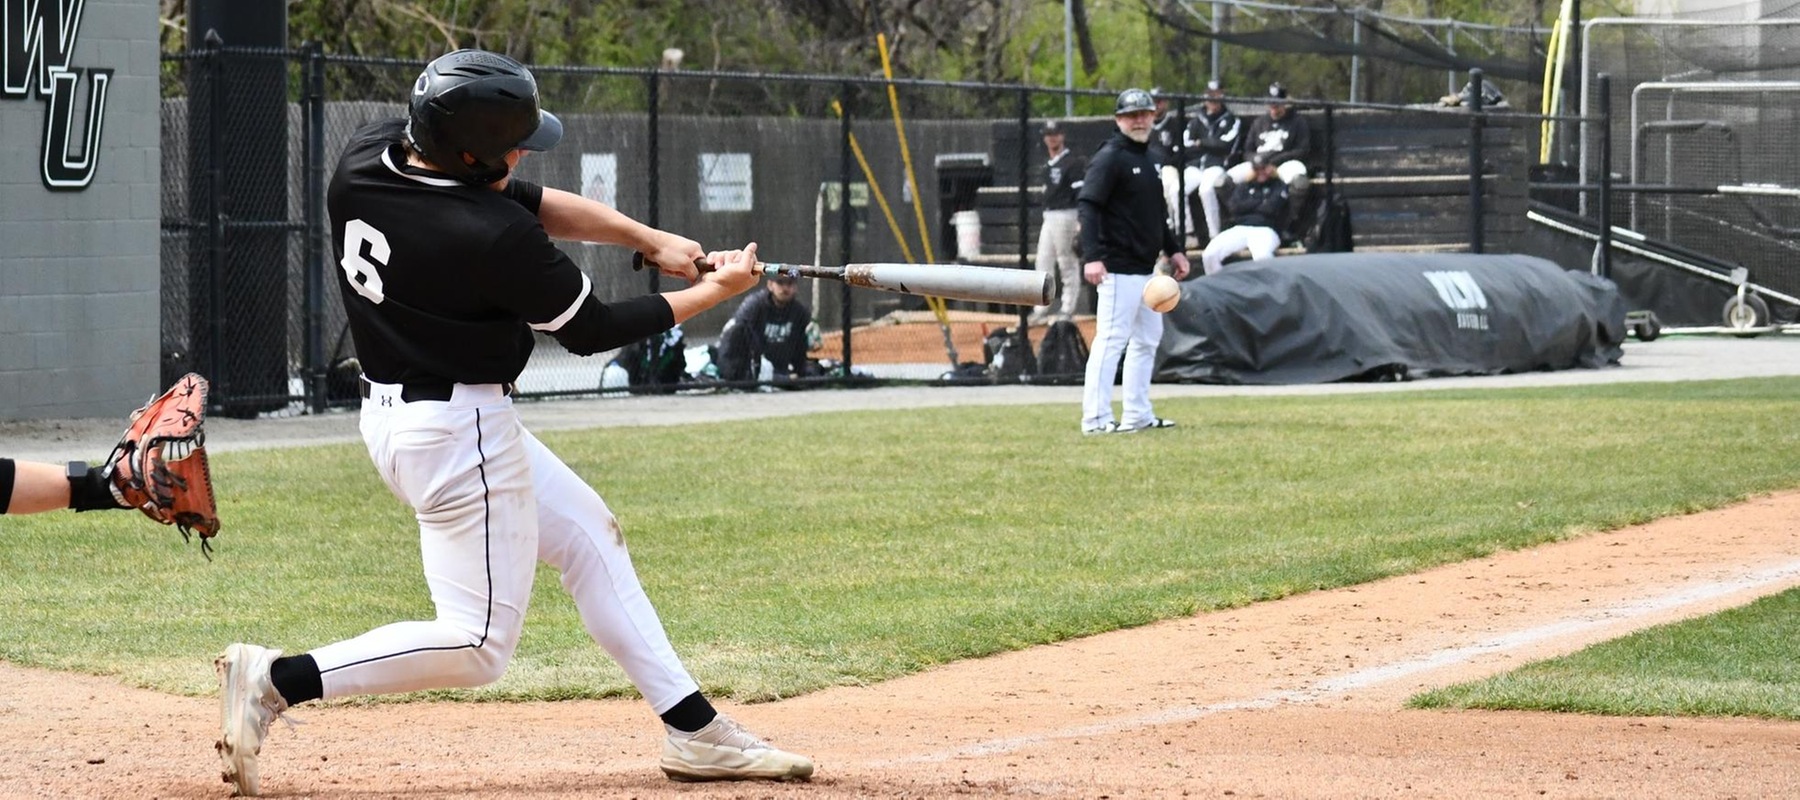 File photo of Tyler Pirrung who went 7-for-7 with a homer, a double, and 4 RBI in the doubleheader at Chestnut Hill. Copyright 2024; Wilmington University. All rights reserved. Photo by Alea Javorowsky. March 26, 2024 vs. Dominican.